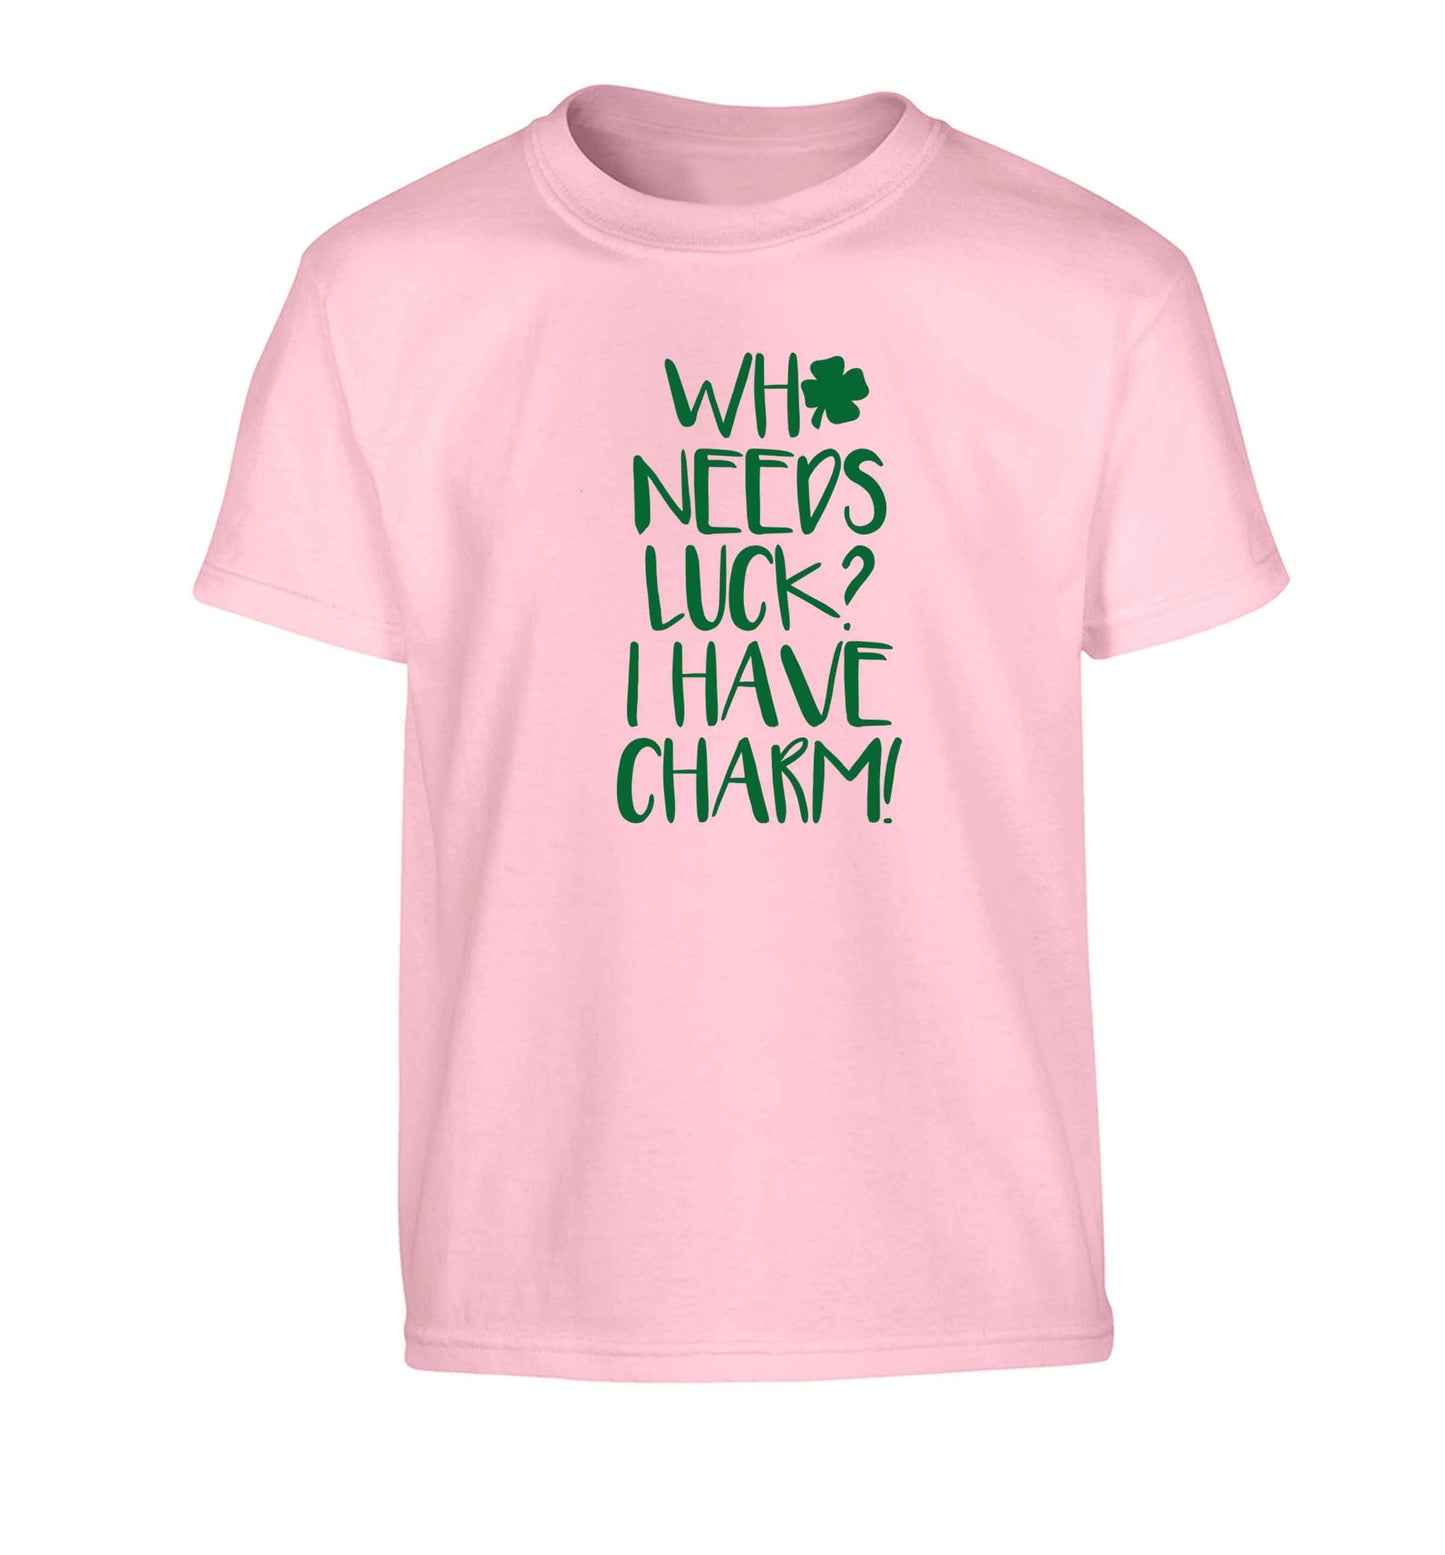 Who needs luck? I have charm! Children's light pink Tshirt 12-13 Years